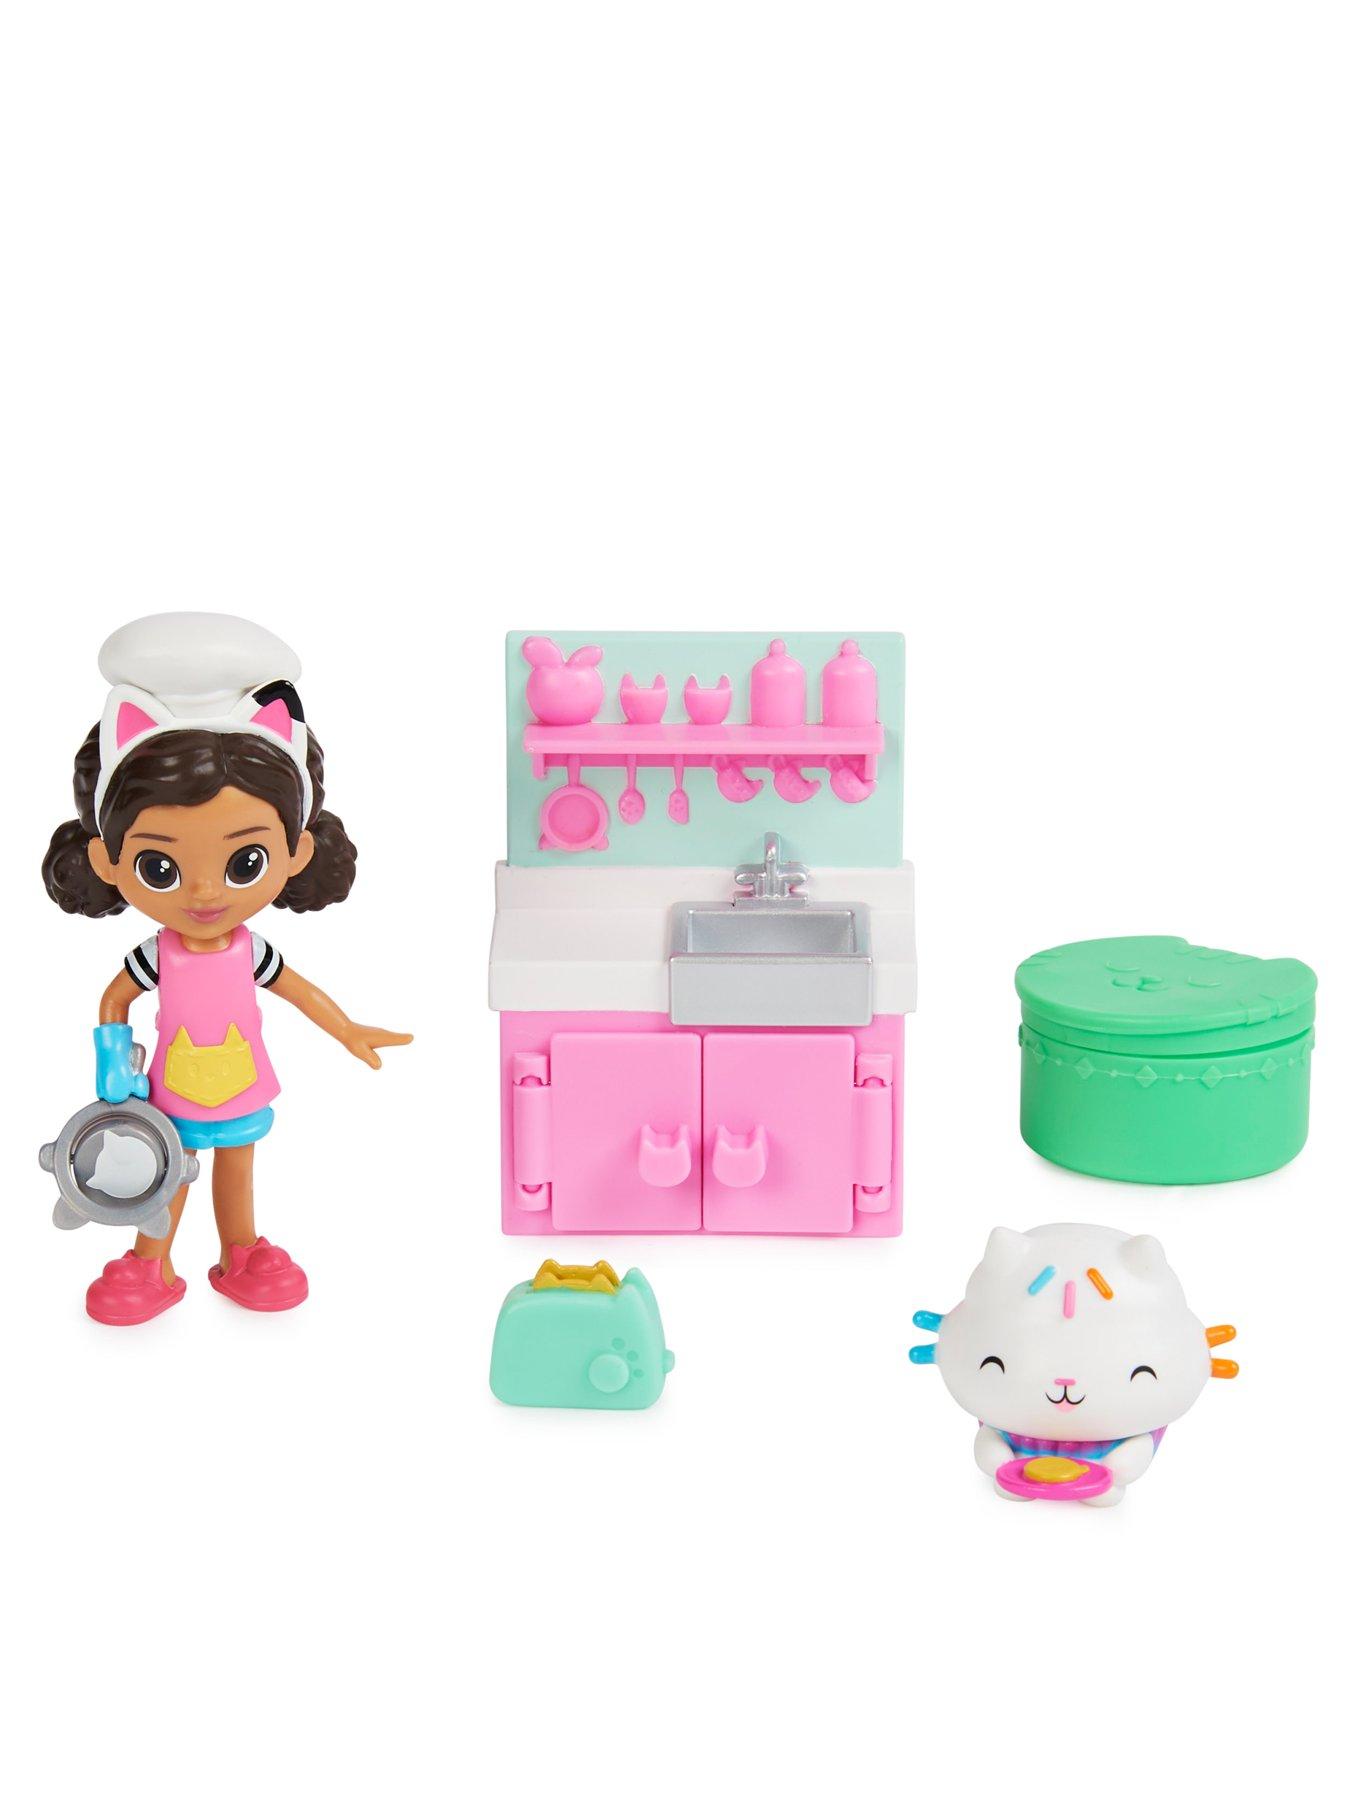 Gabby's Dollhouse, Kitty Camera, Pretend Play Preschool Kids Toys for Girls  and Boys Ages 3 and up